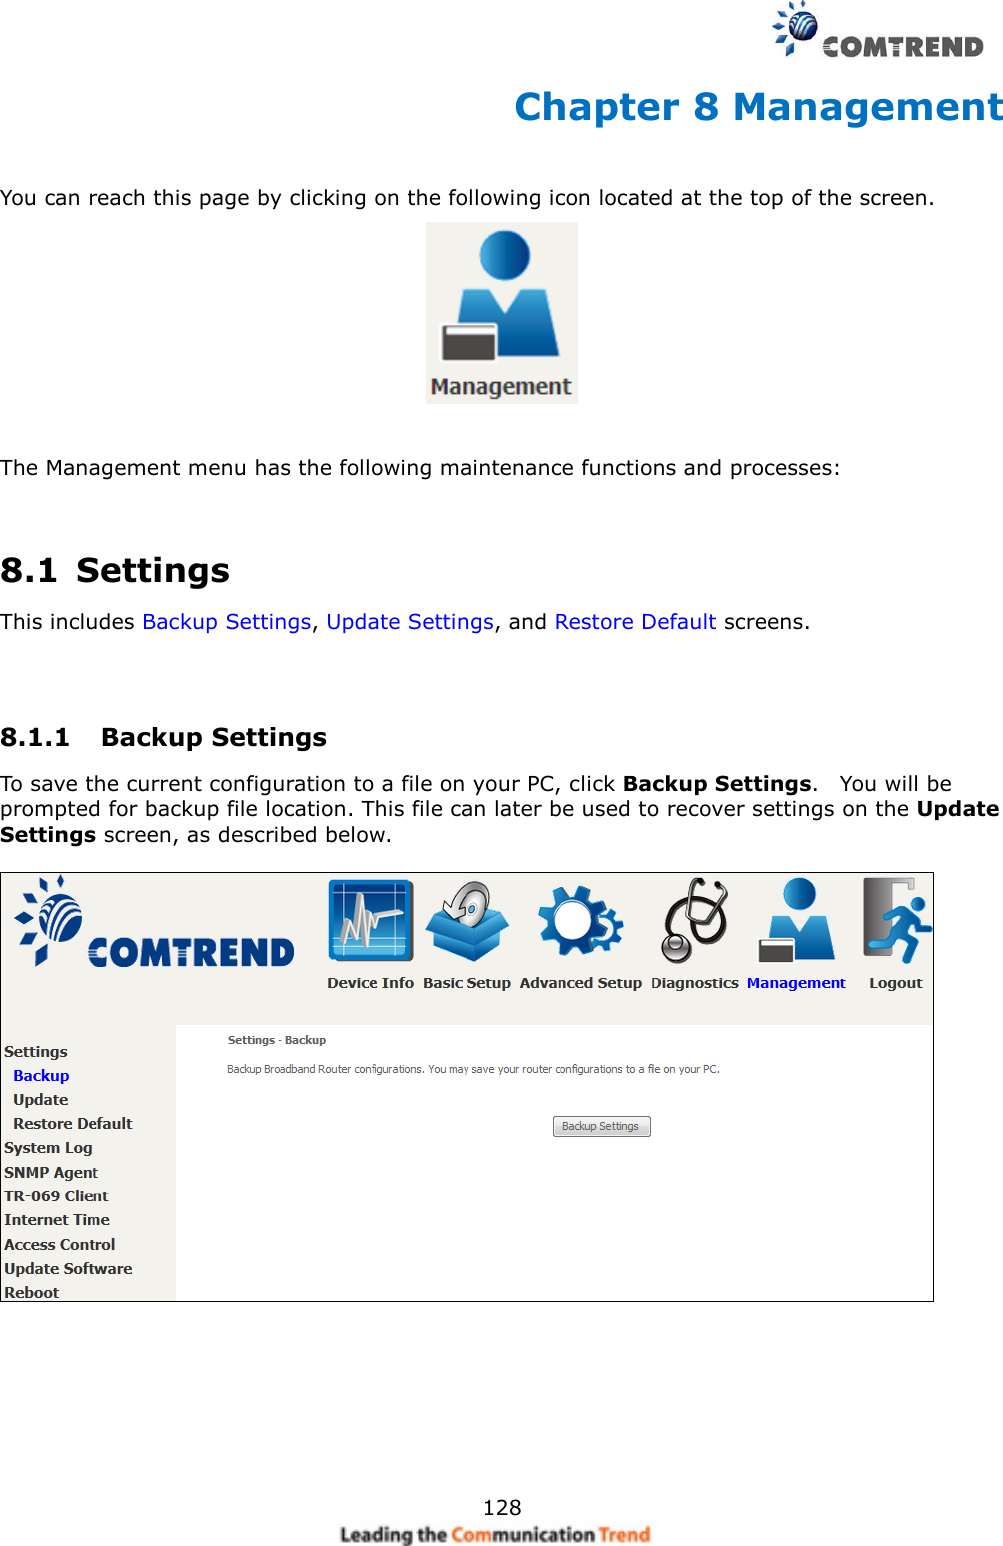     128 Chapter 8 Management You can reach this page by clicking on the following icon located at the top of the screen.    The Management menu has the following maintenance functions and processes:   8.1  Settings This includes Backup Settings, Update Settings, and Restore Default screens.   8.1.1  Backup Settings   To save the current configuration to a file on your PC, click Backup Settings.    You will be prompted for backup file location. This file can later be used to recover settings on the Update Settings screen, as described below.     